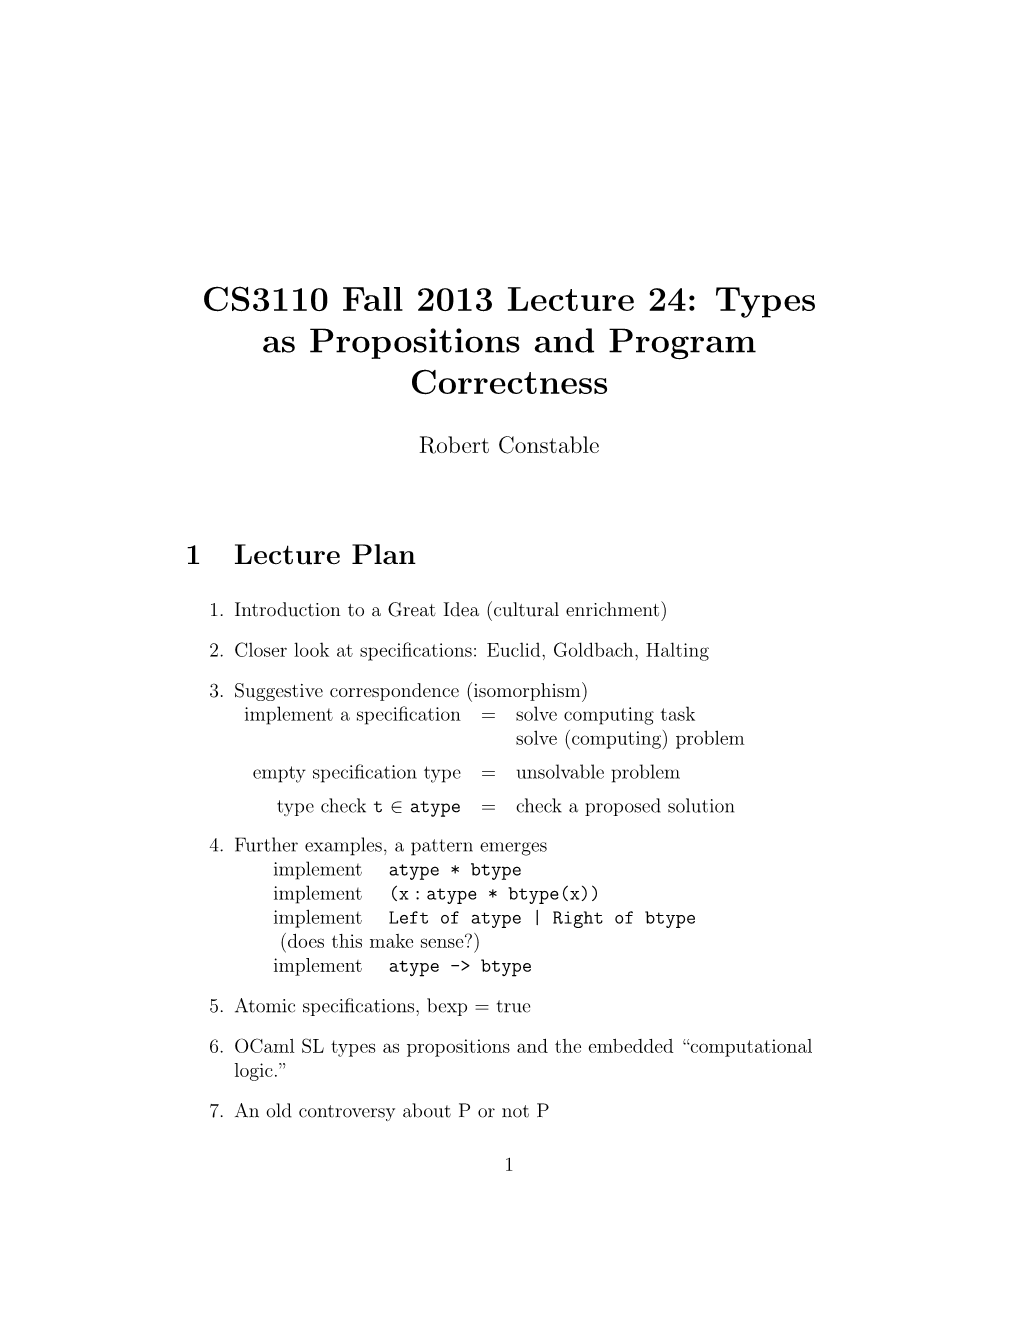 CS3110 Fall 2013 Lecture 24: Types As Propositions and Program Correctness